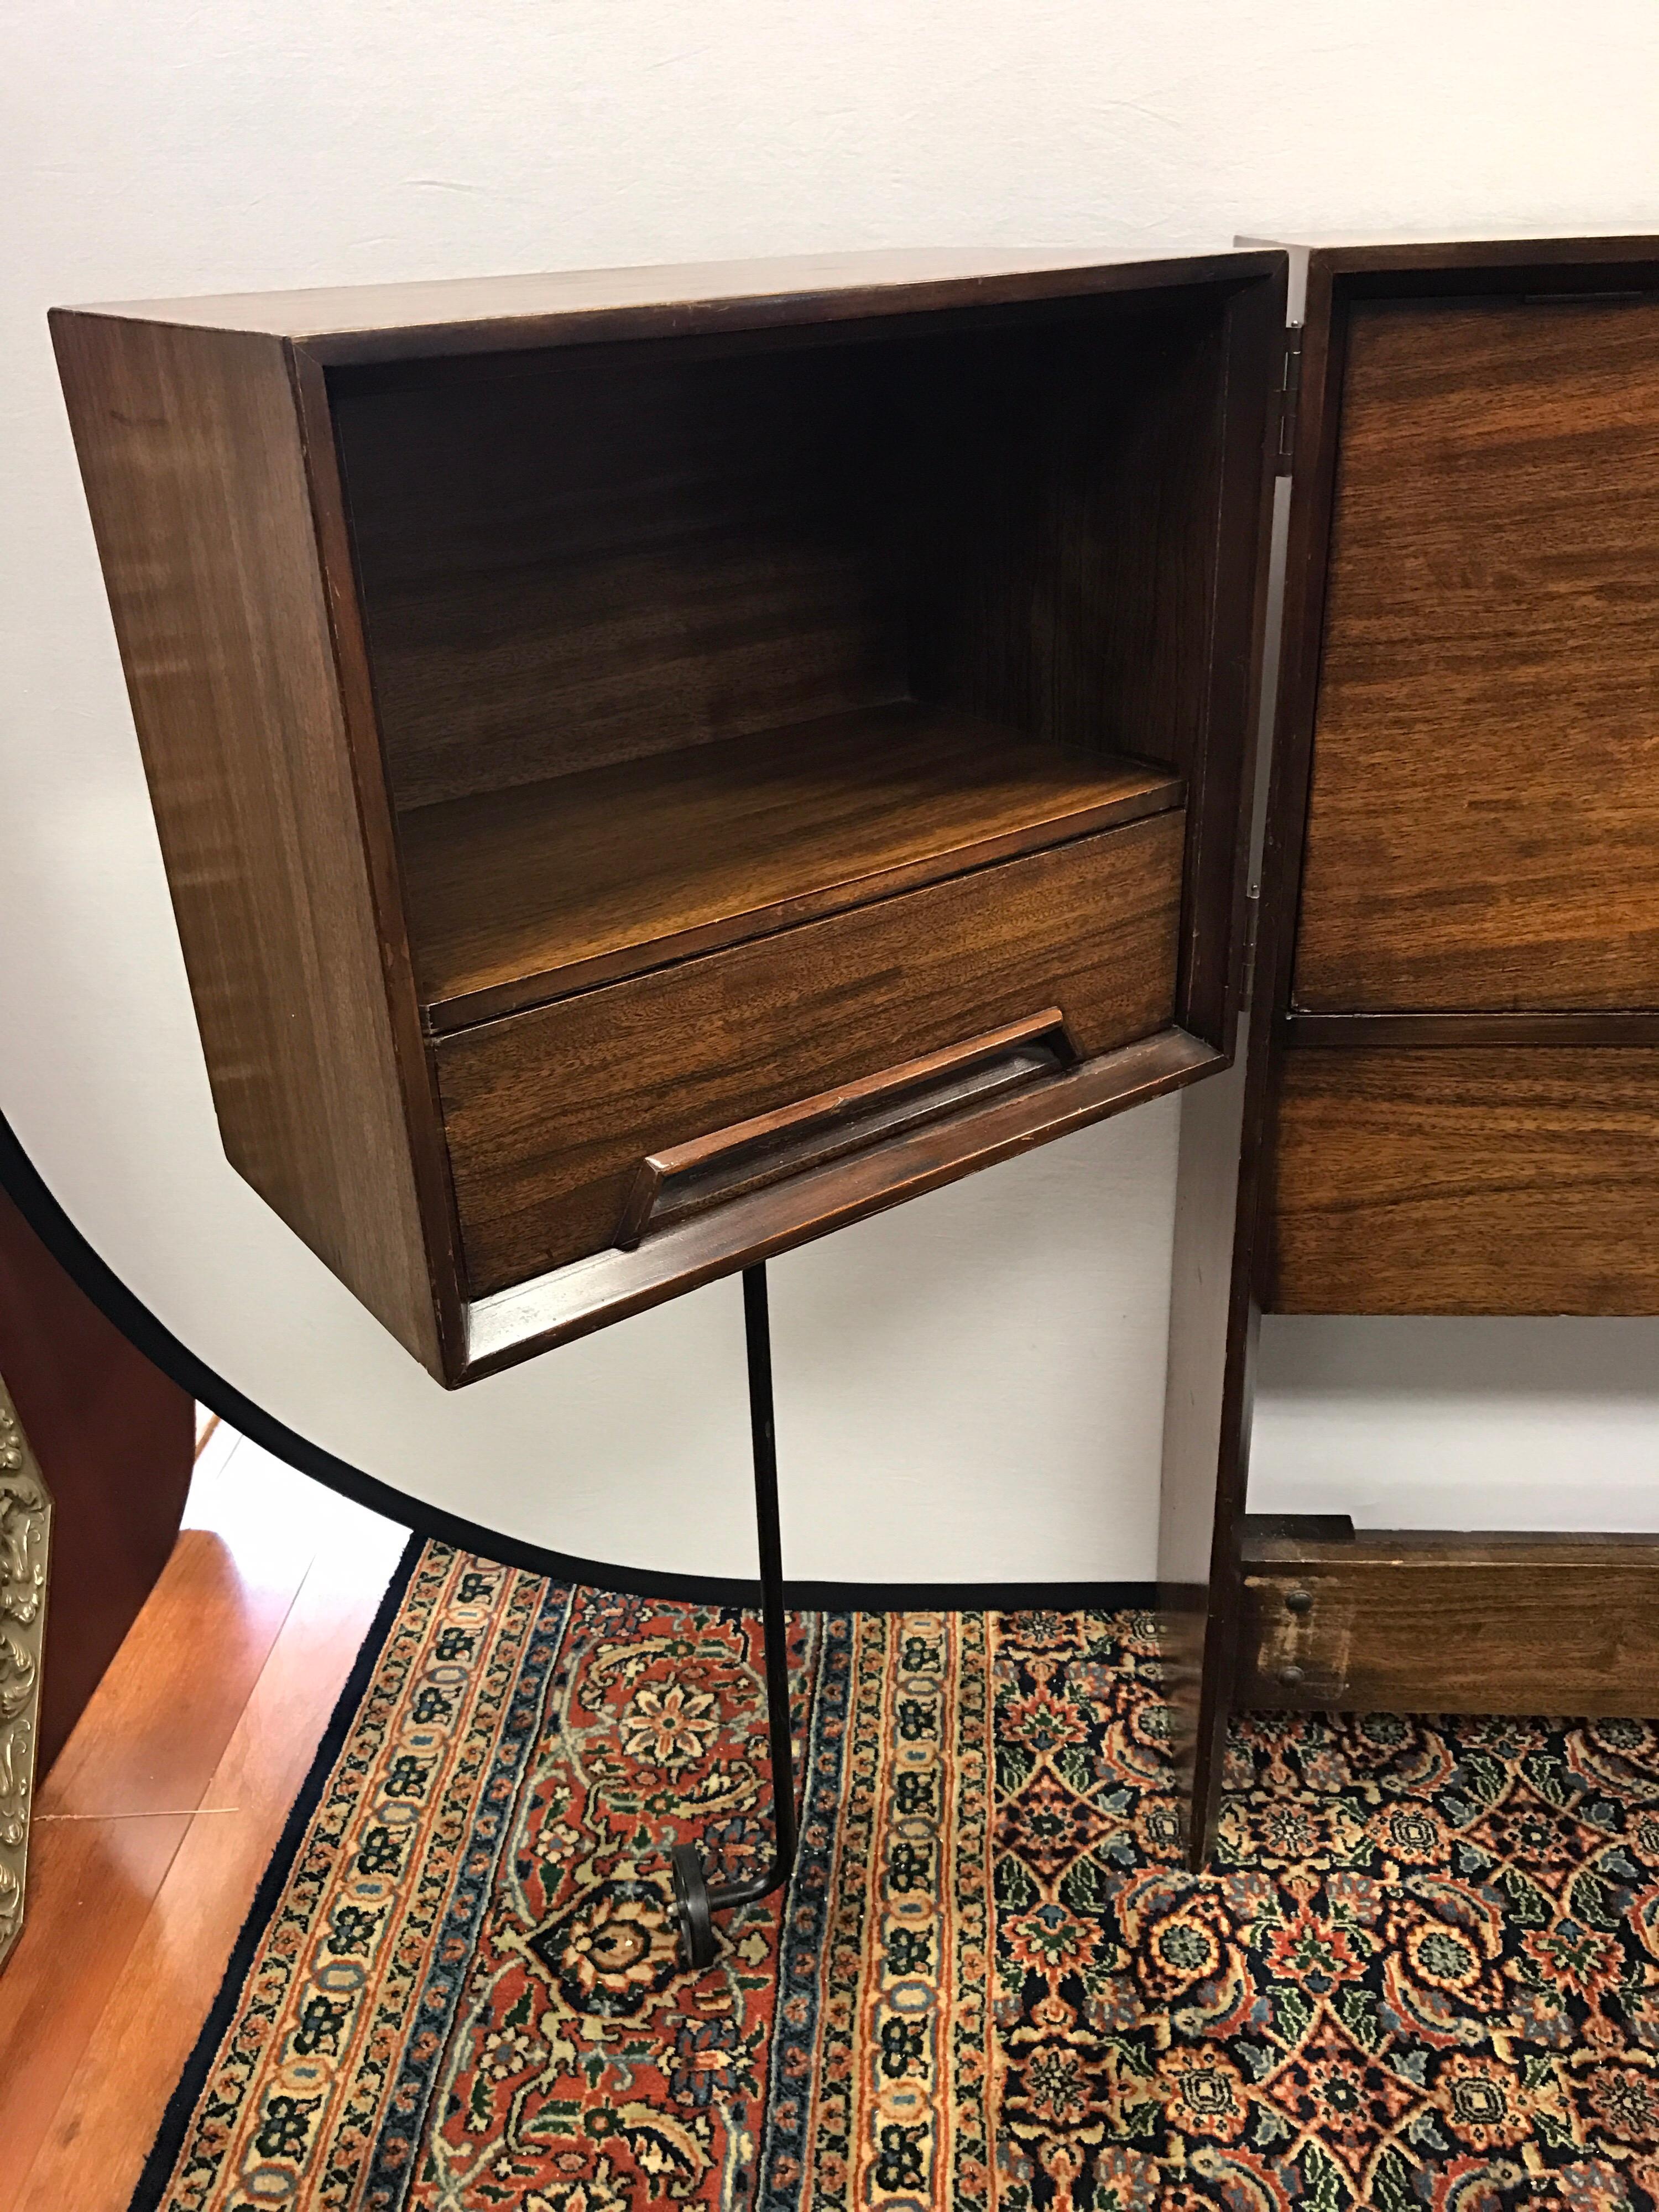 Rare Milo Baughman designed Drexel Perspective full bed with floating cabinets. Nothing short of spectacular. Done and mahogany and rosewood. Please note we have other matching pieces from this set, including a tall dresser and a lower large eight